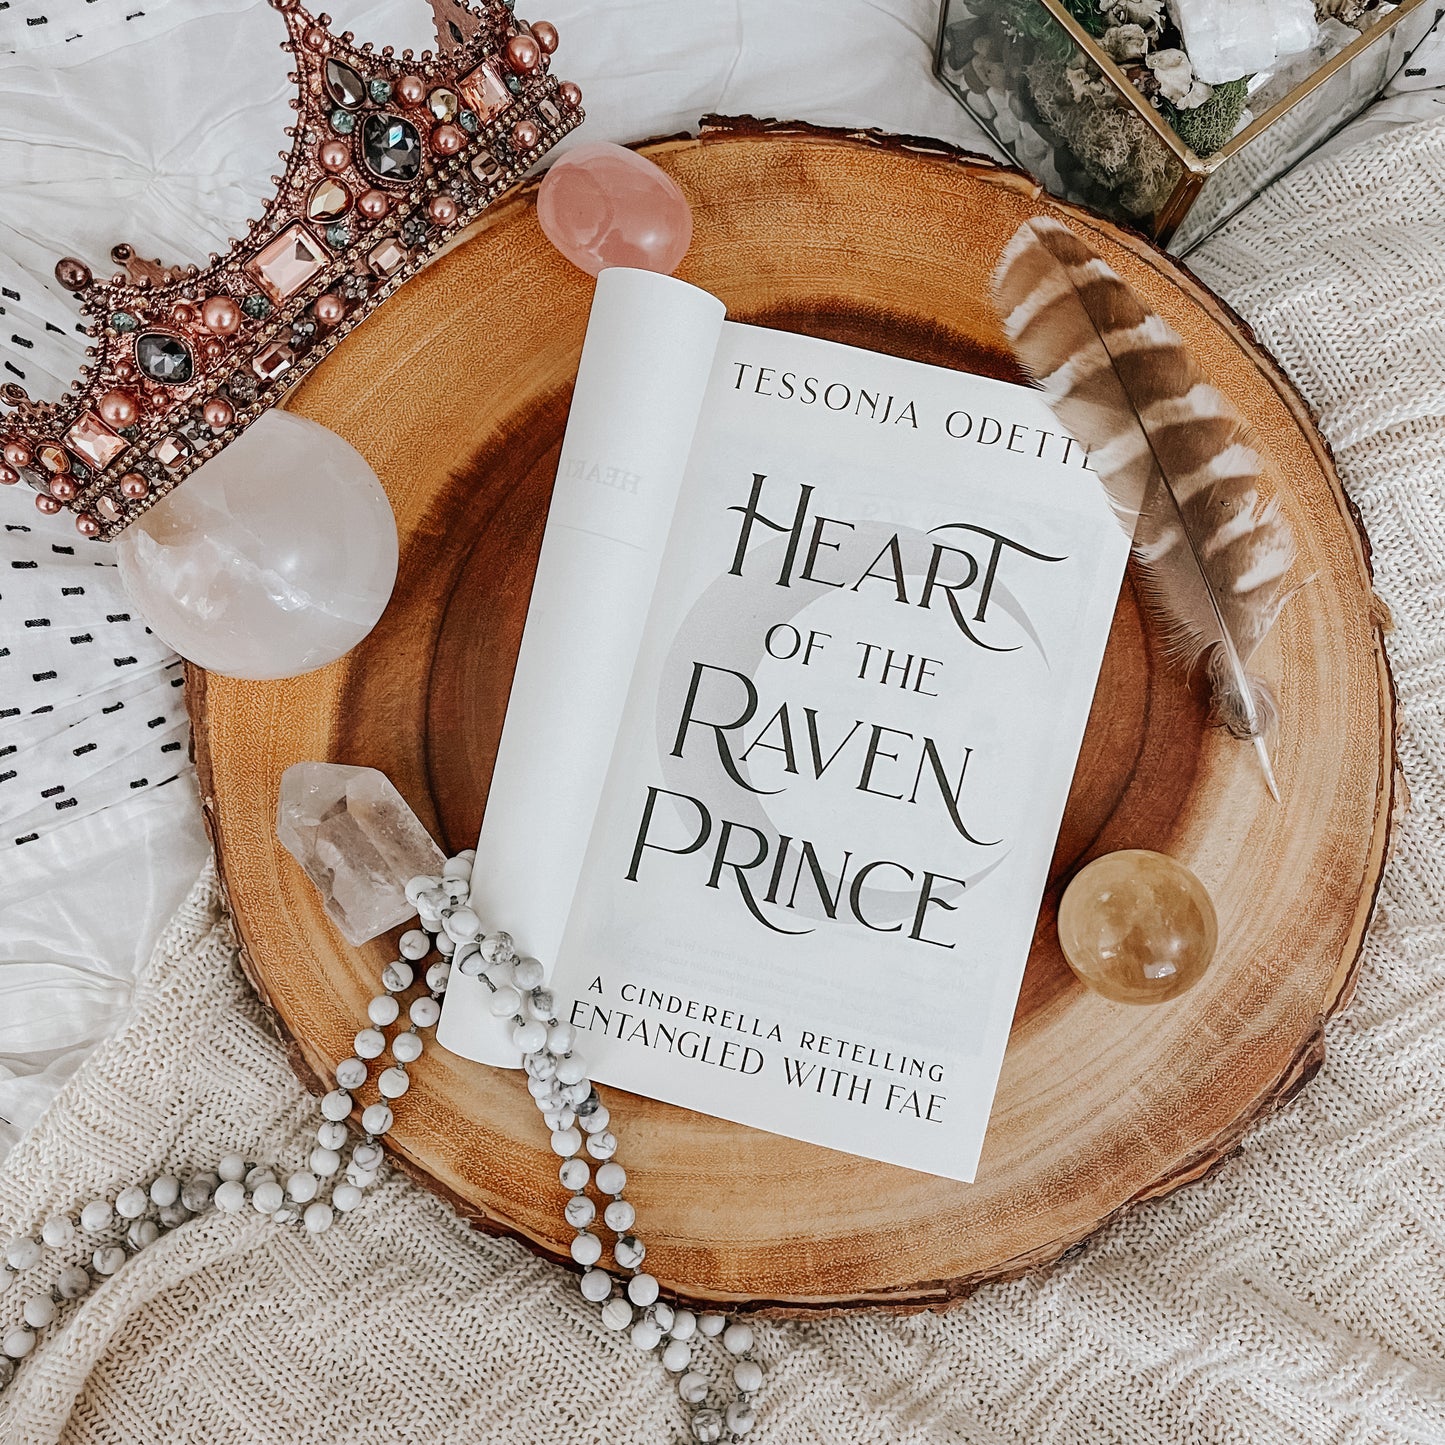 Heart of the Raven Prince (paperback) signed